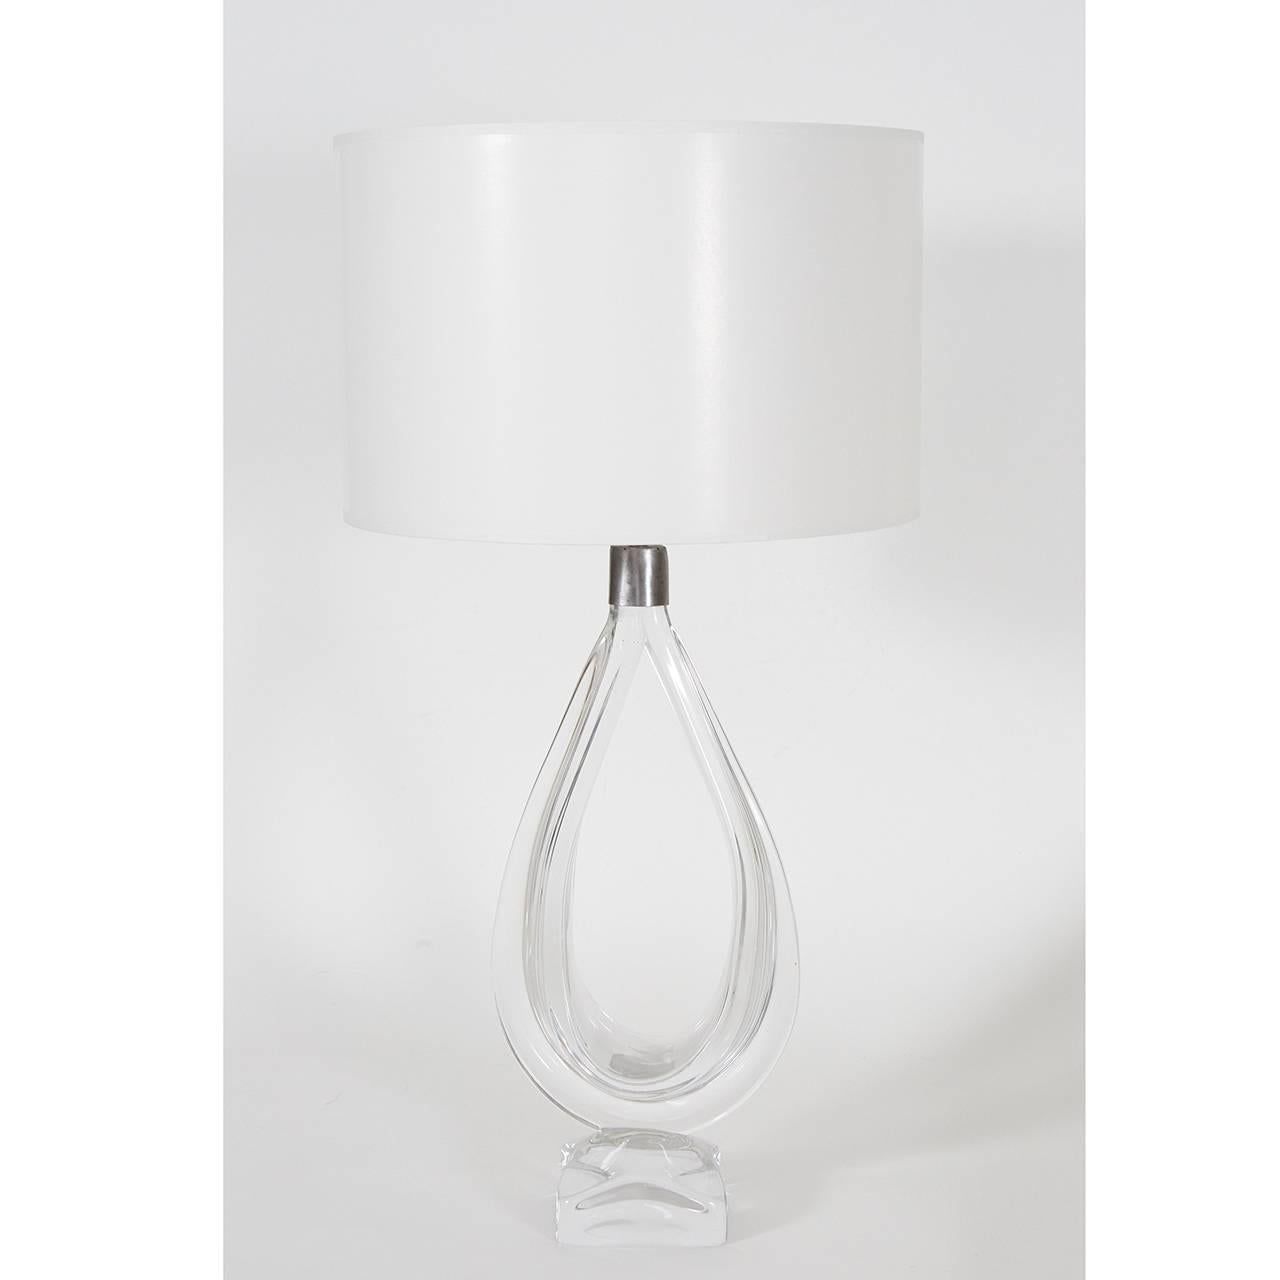 This crystal clear glass lamp from Daum is a great example of Mid-Century Modern sculptural elegance. The piece begins in a block of glass that resembles ice and flows up into a loop of flowing glass that can double as a single drop of water. We